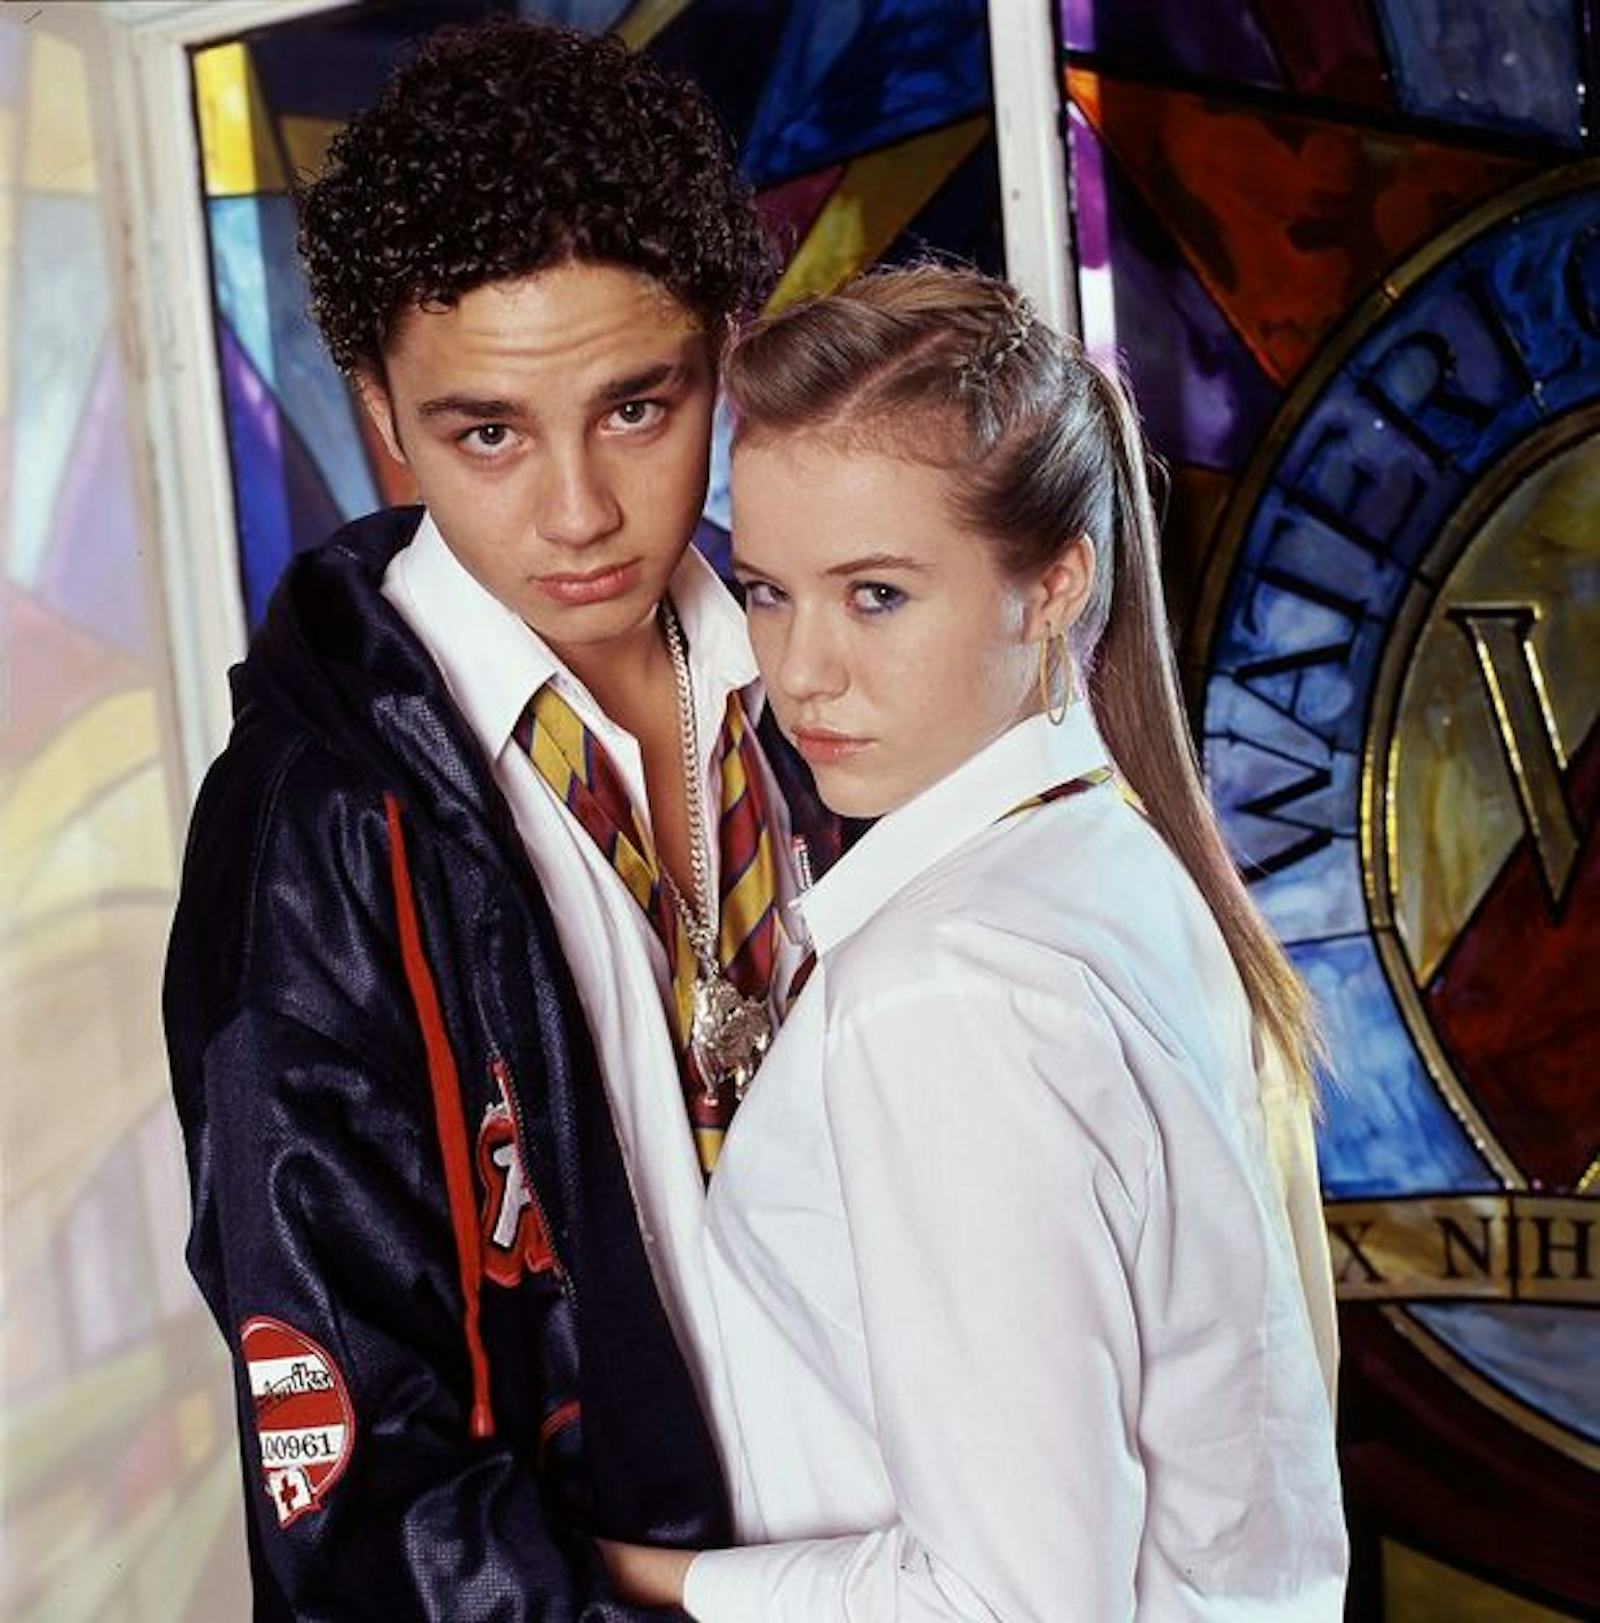 'Waterloo Road' Cast, Plot, & More About BBC One's Reboot